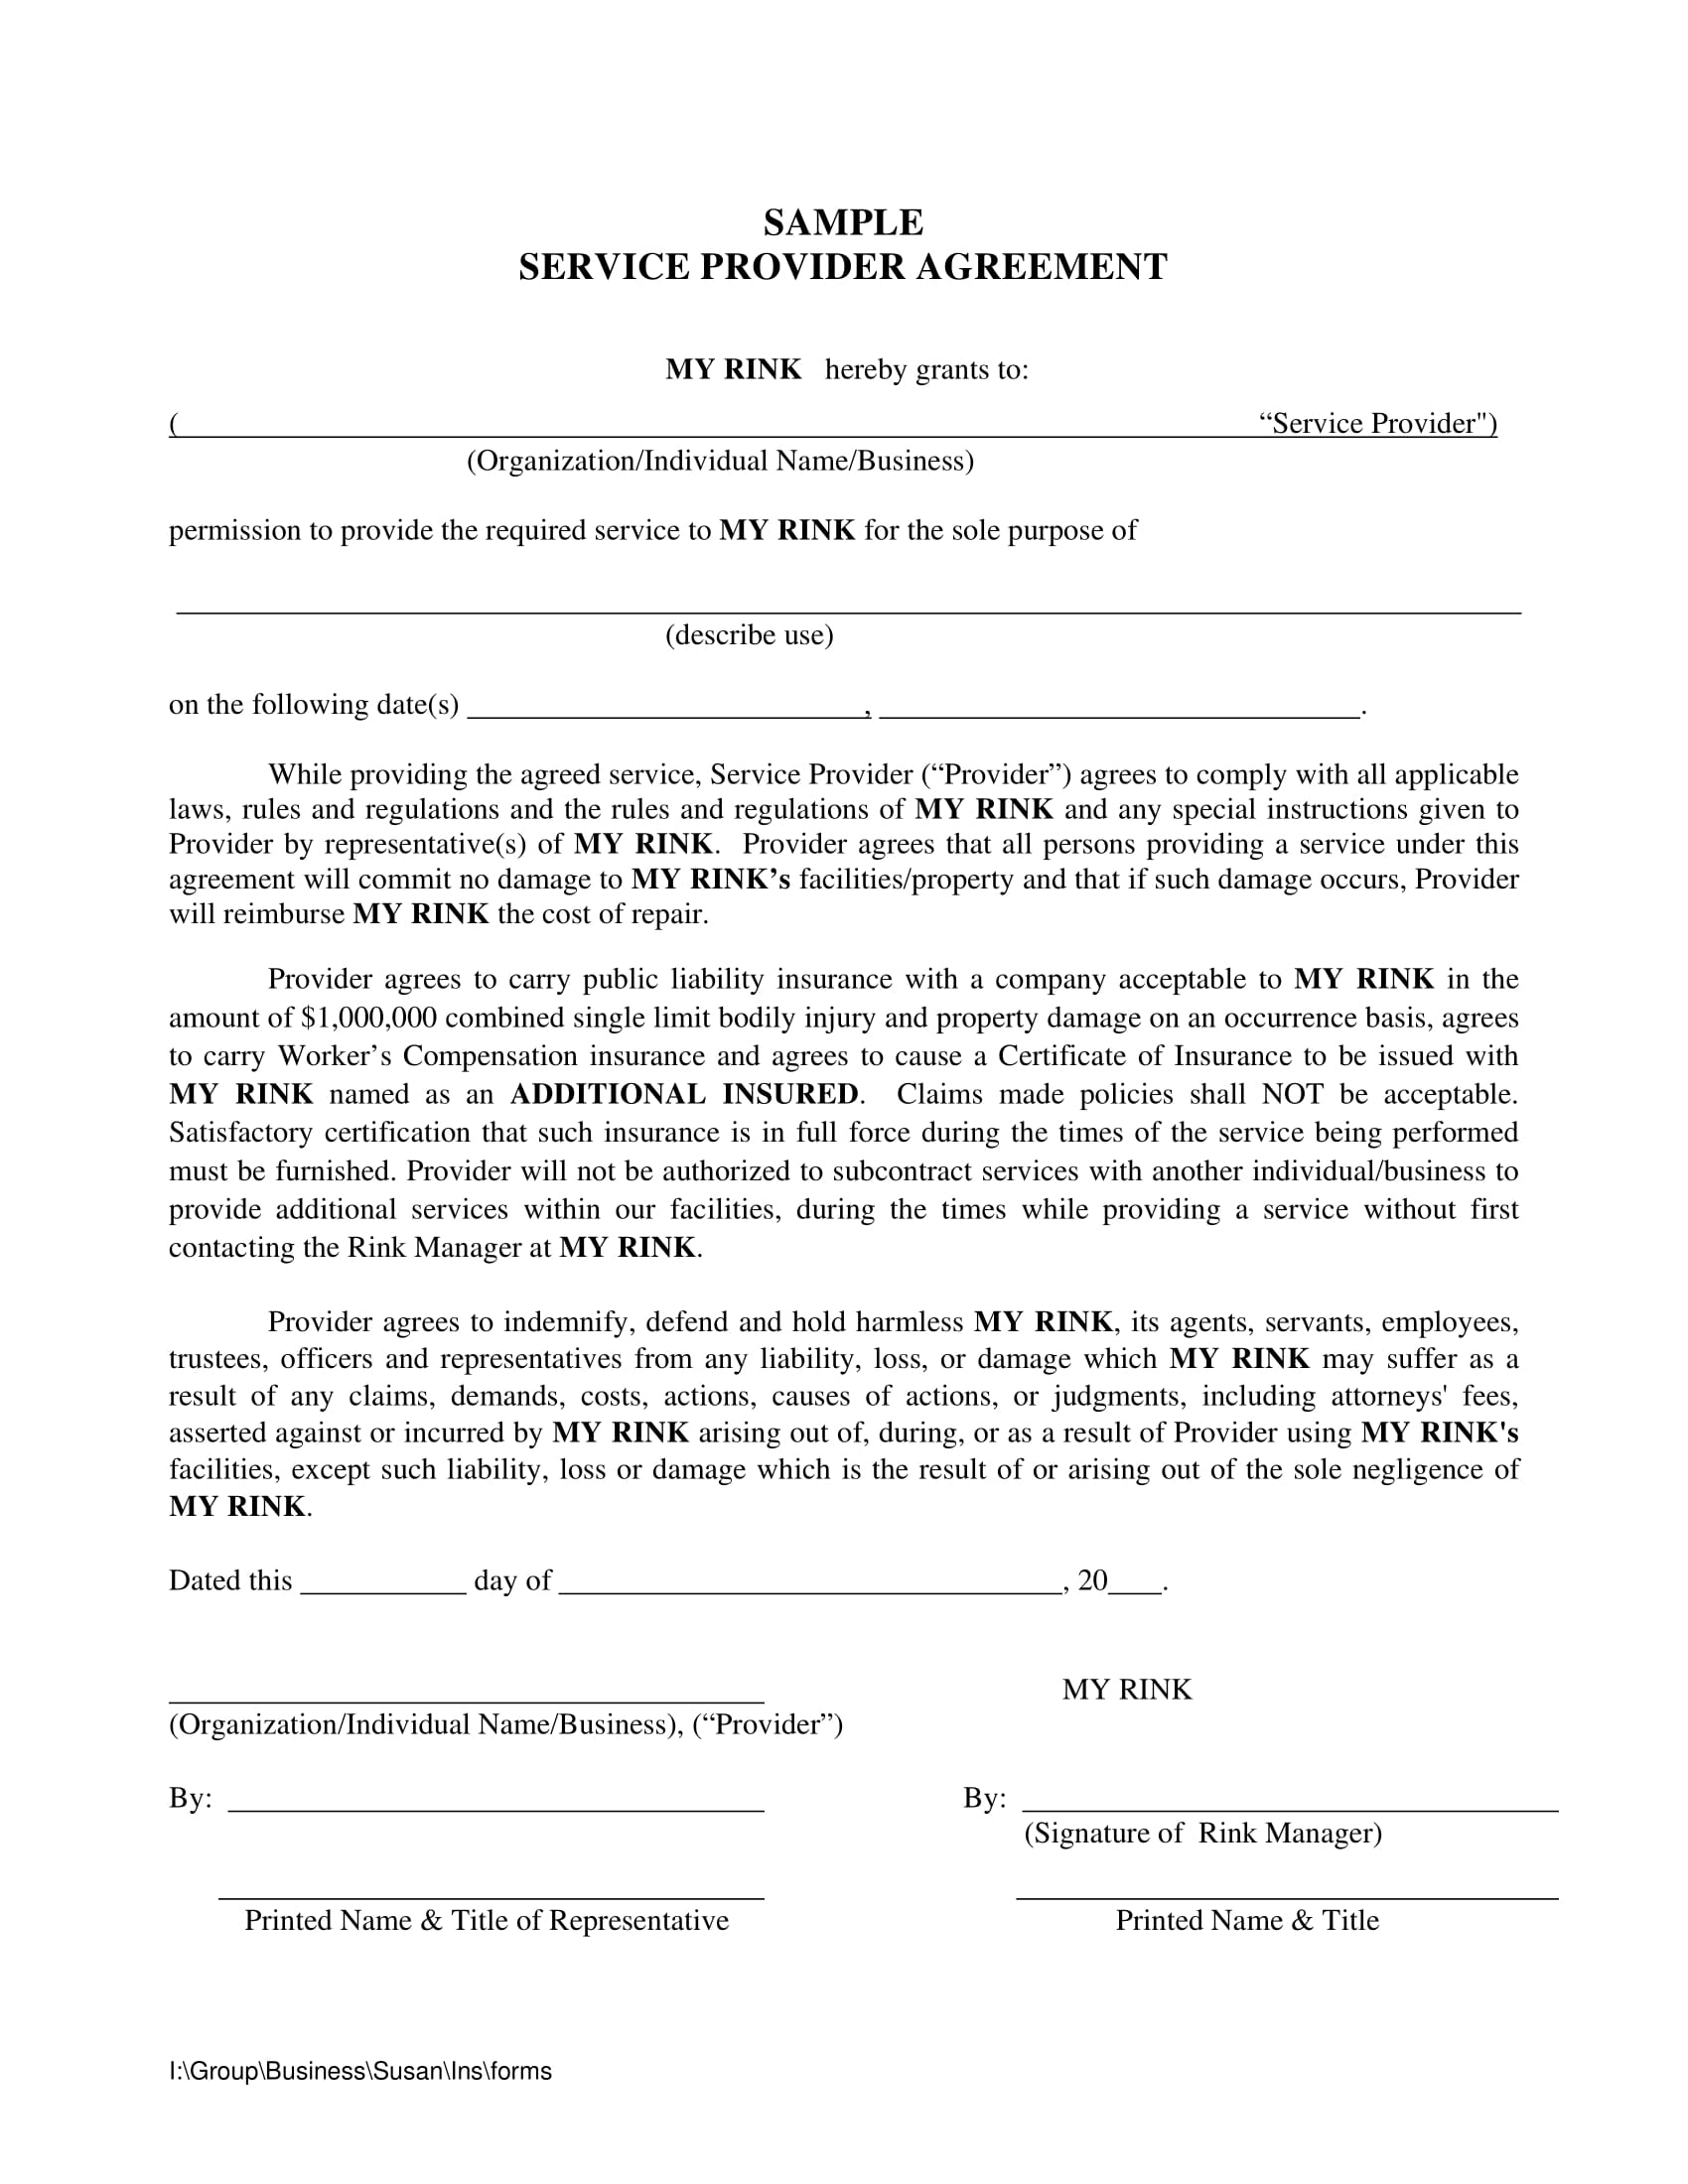 Service Provider Agreement Contract Template Example 1